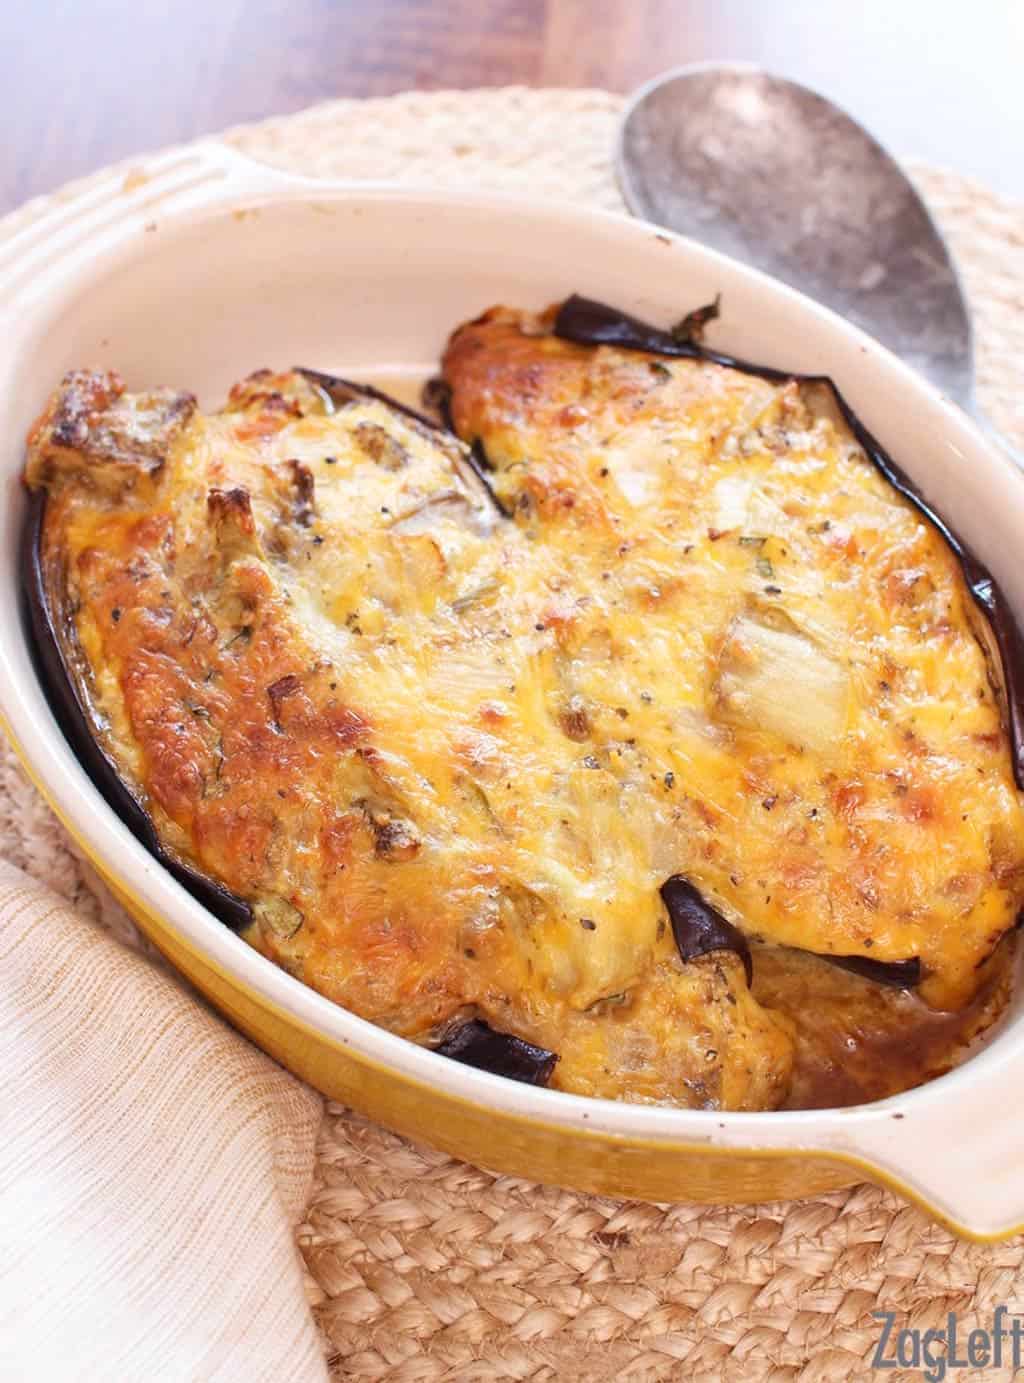 Two halves of twice baked eggplant in a cooking dish.